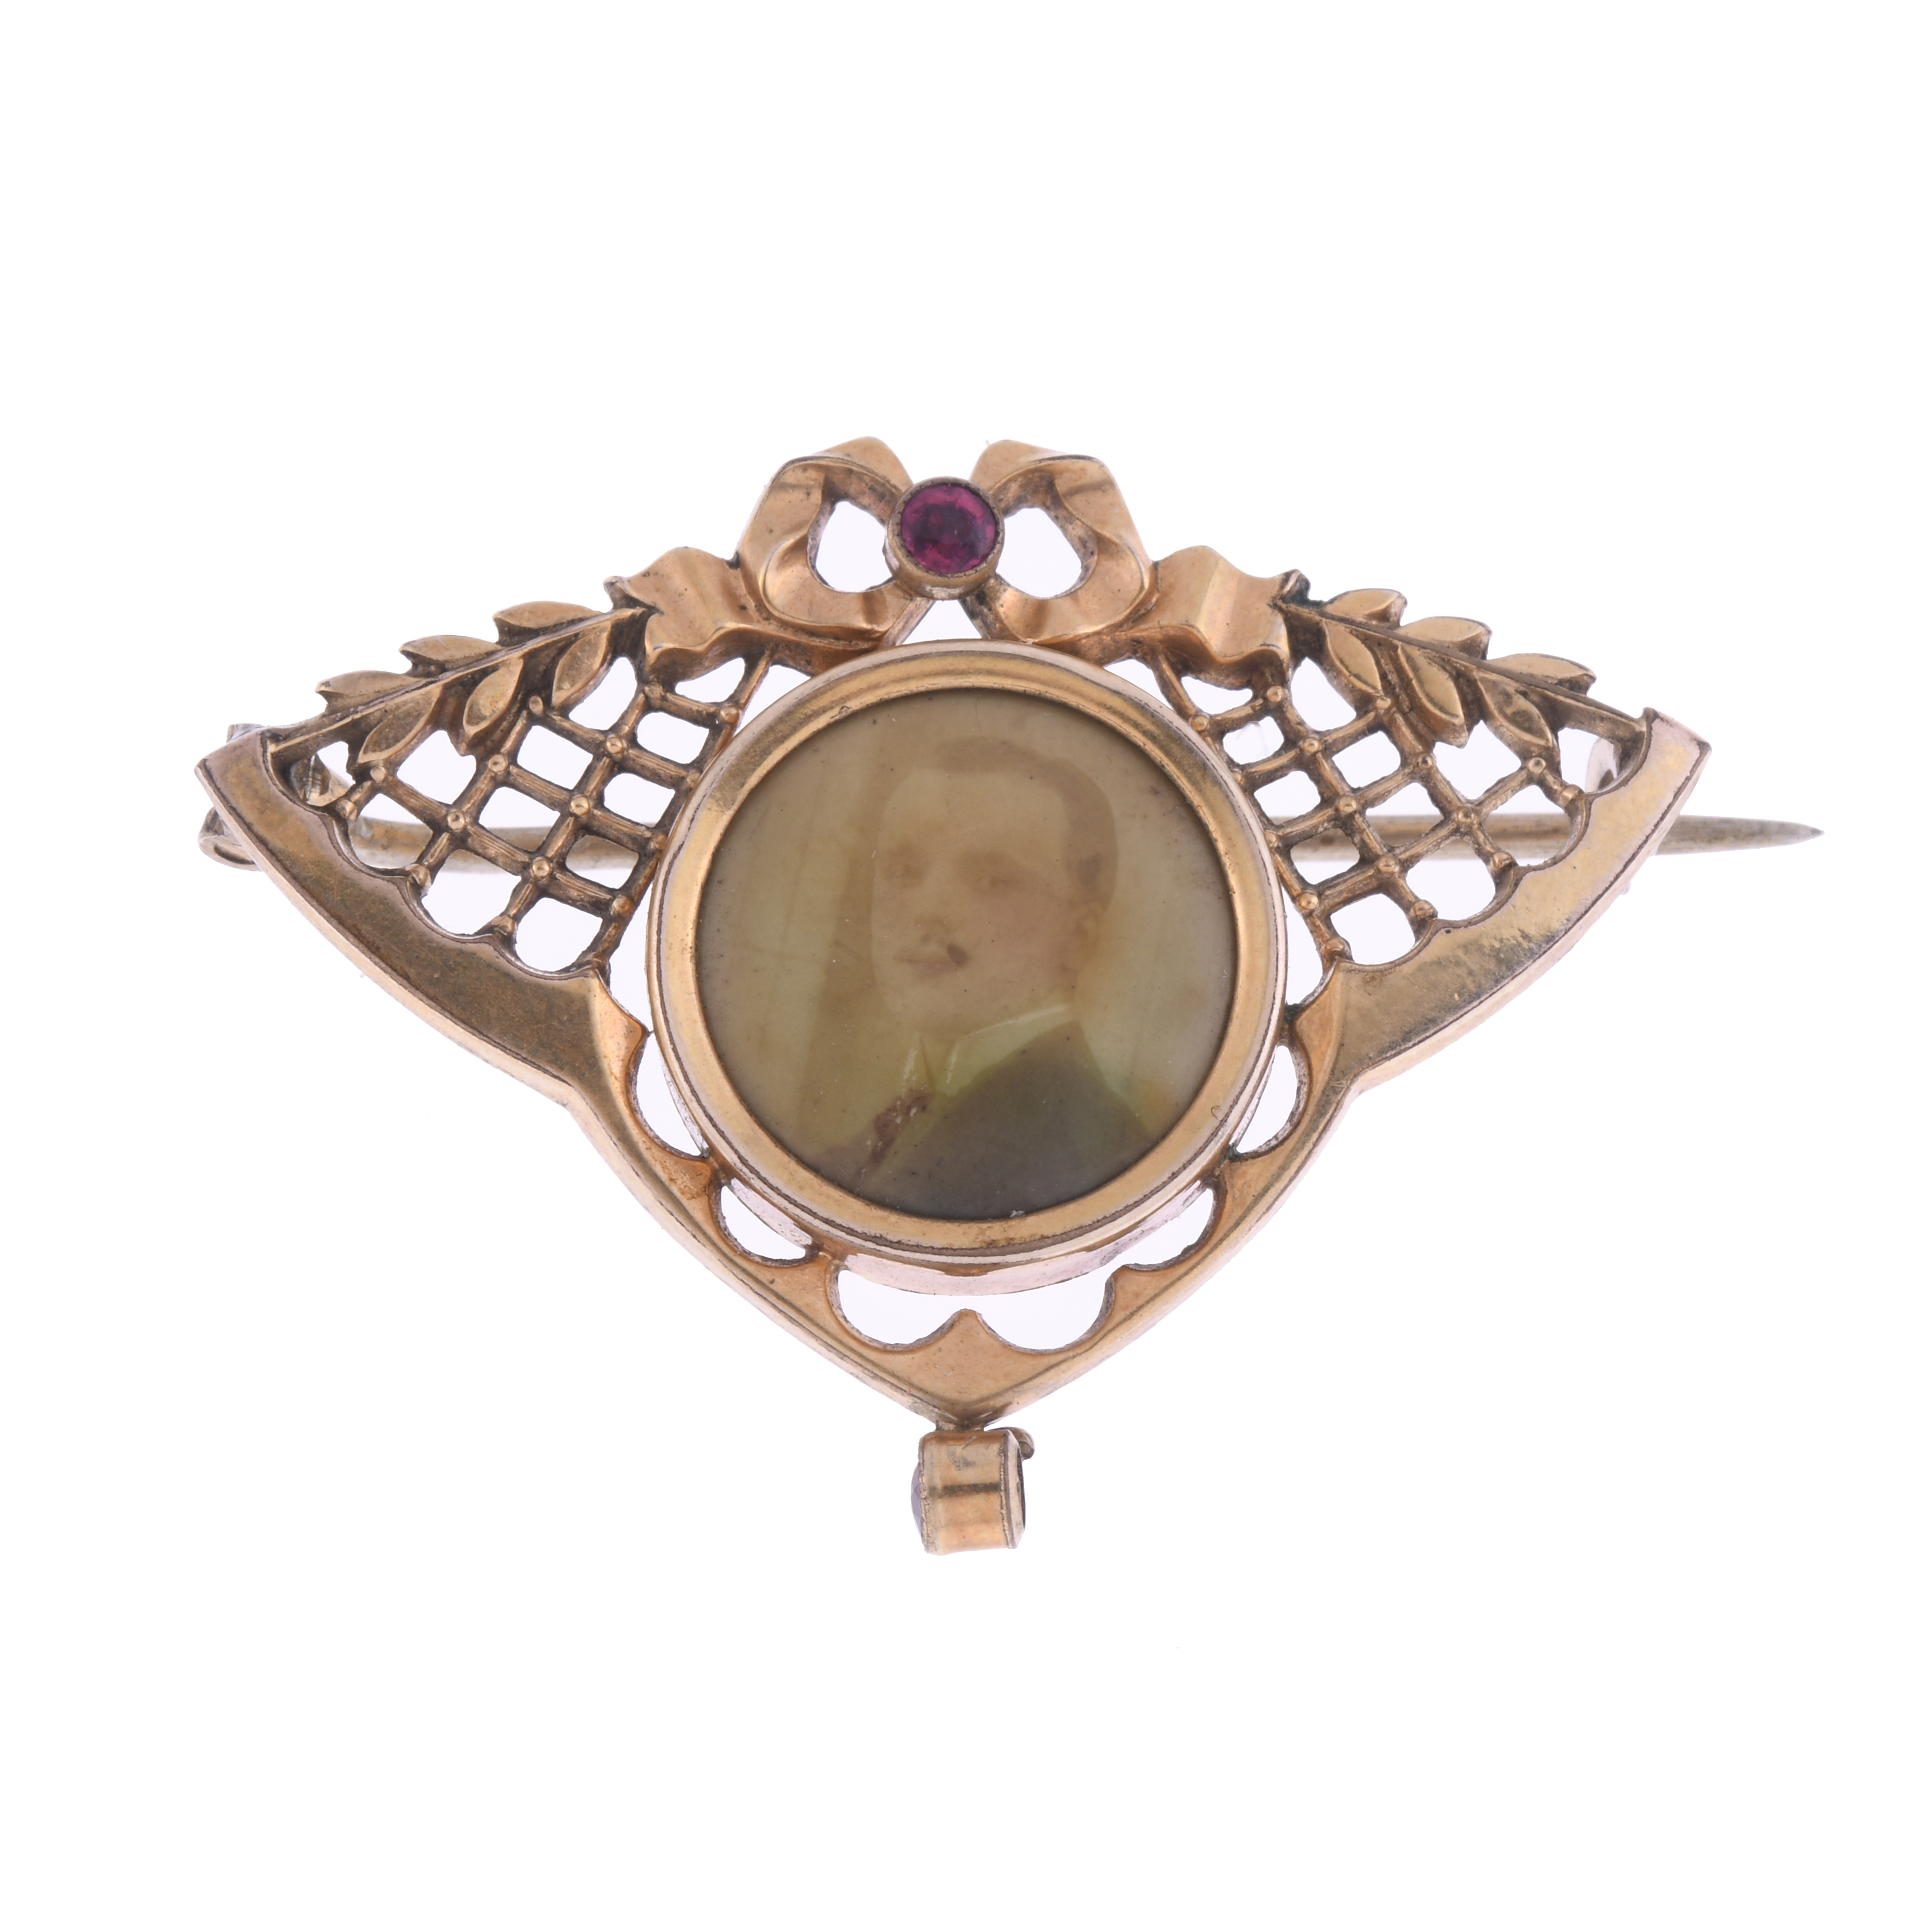 ANTIQUE BROOCH WITH A PHOTOGRAPH.